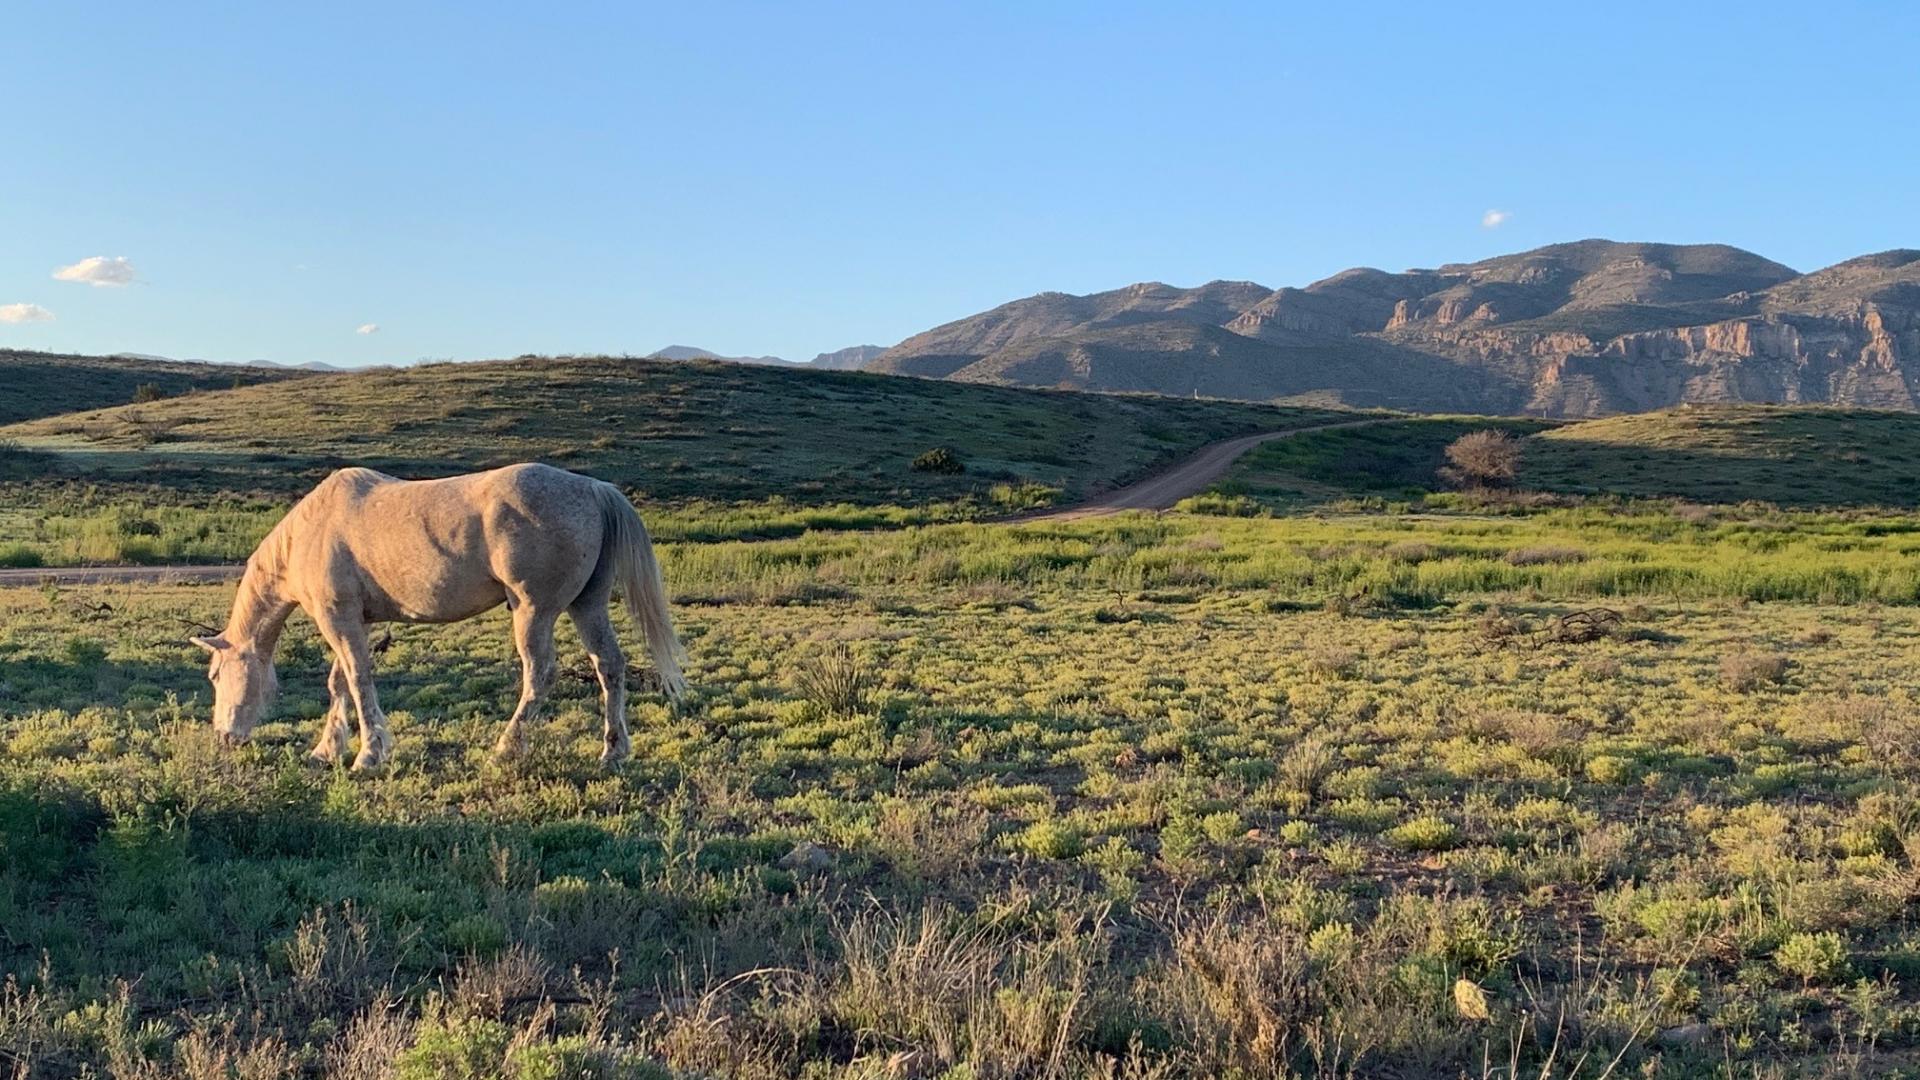 Horse grazing with Gila Wilderness in background